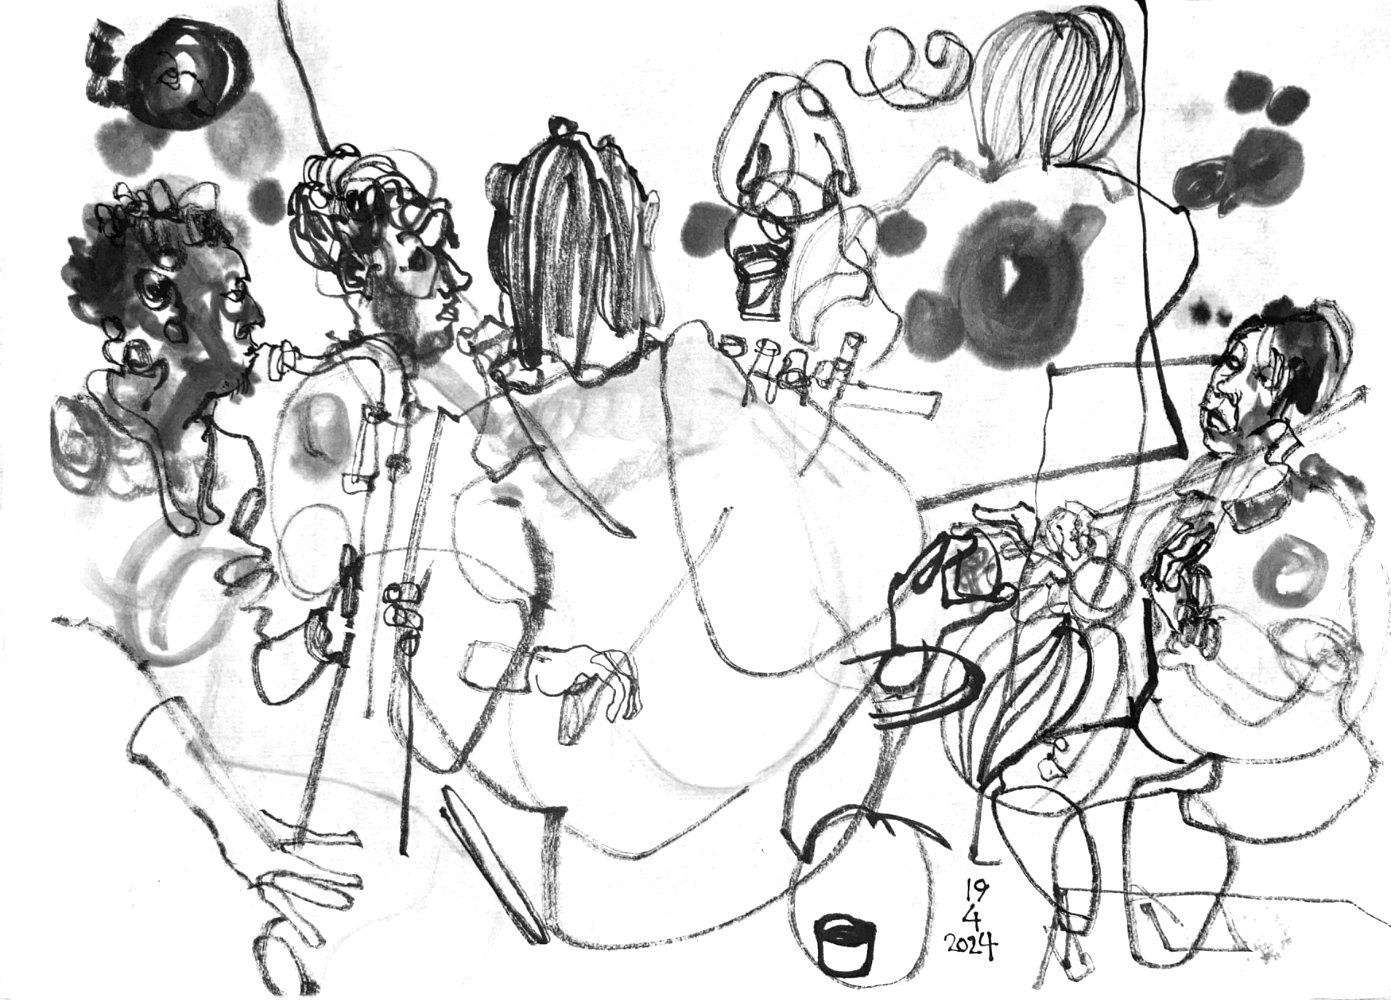 Ink drawing of five people performing: man on saxophone,  cellist, woman on flute, woman manipulating objects (depicted twice), violonist. A projection of a smoking piece of cloth behind the performers.